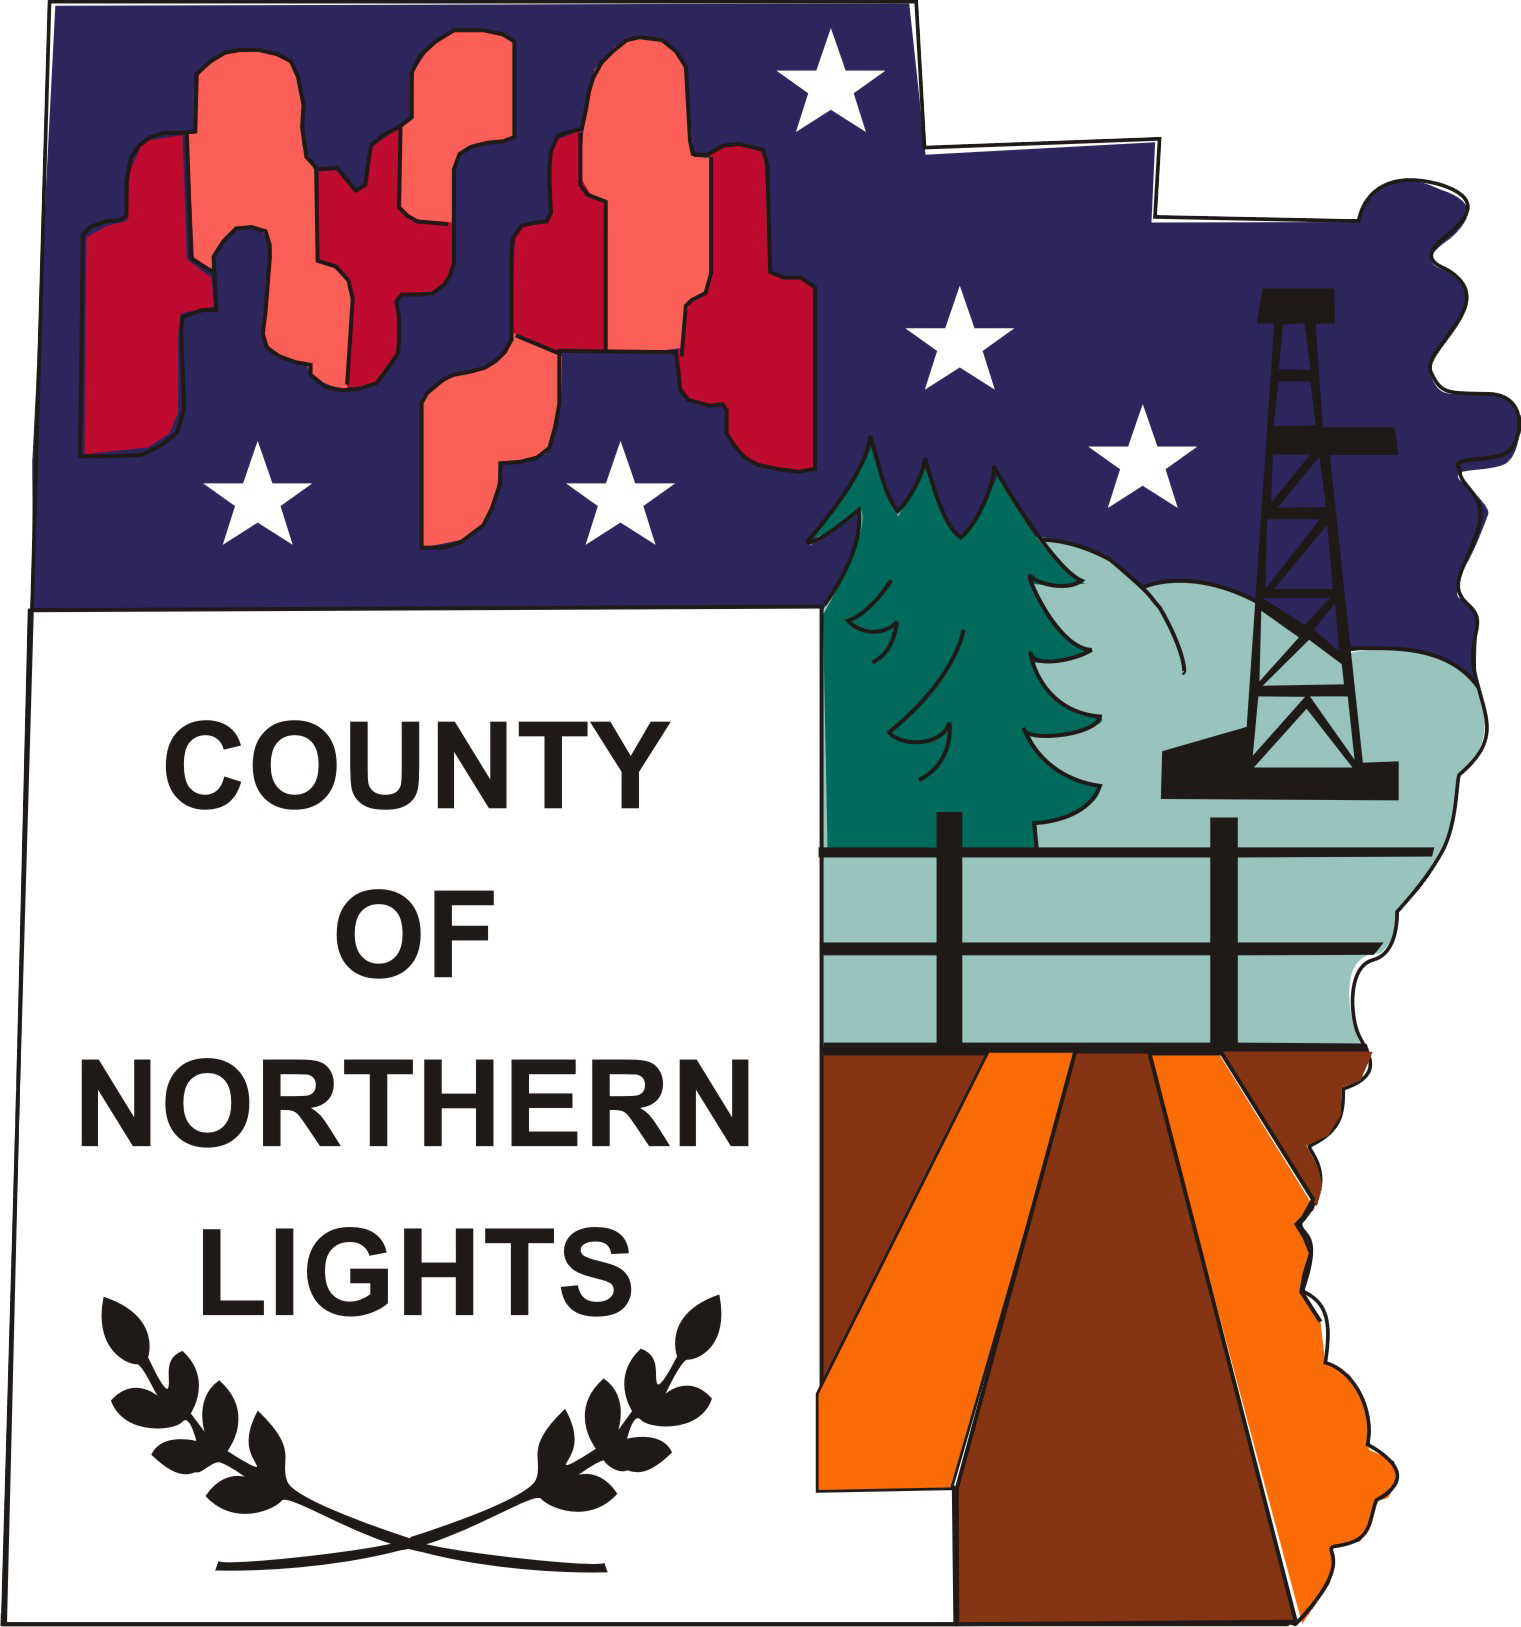 County of Northern Lights